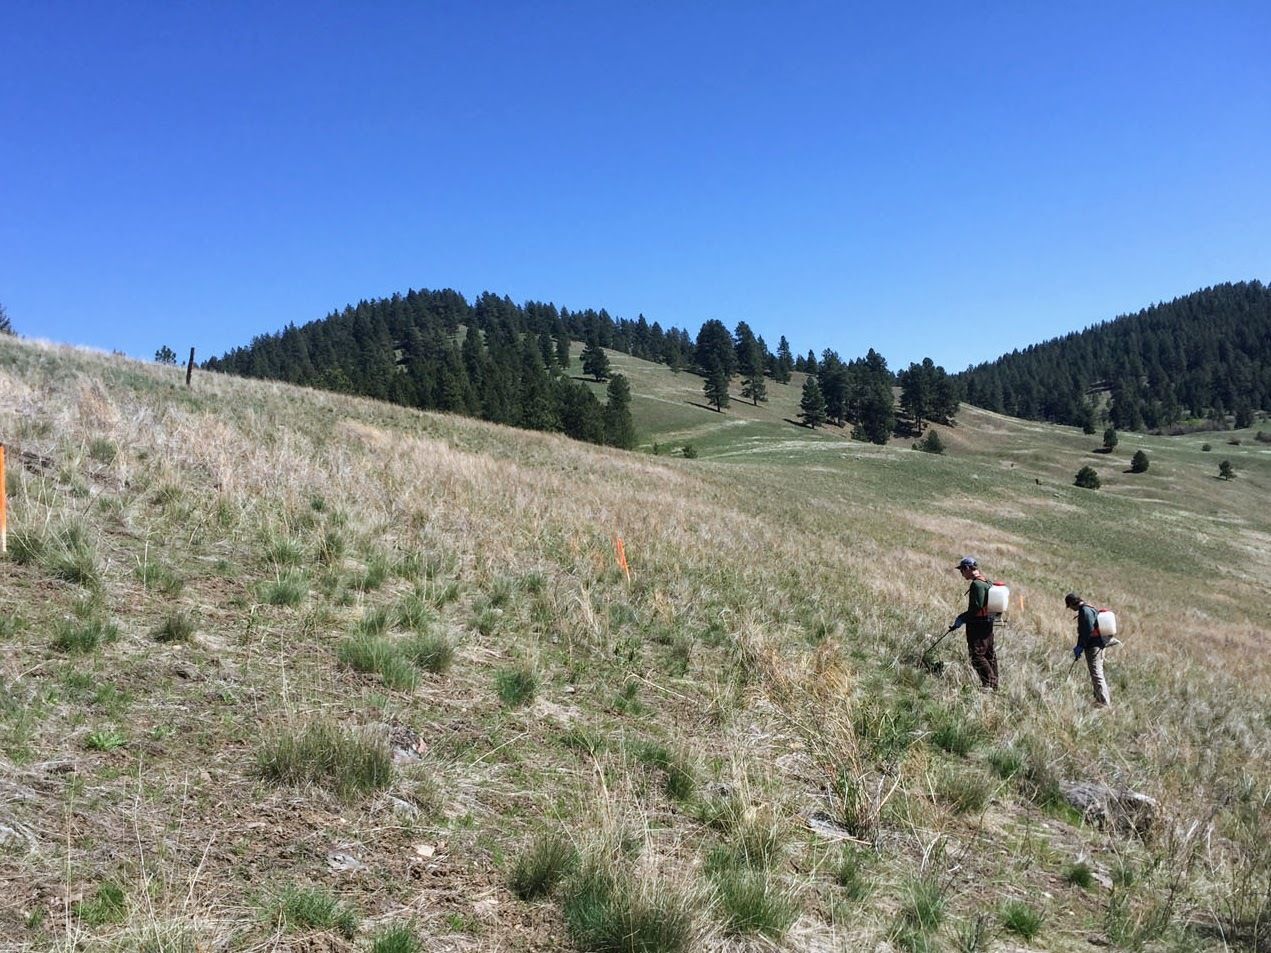 Weeding Out the Problem: How MCC is Restoring Missoula's Public Lands